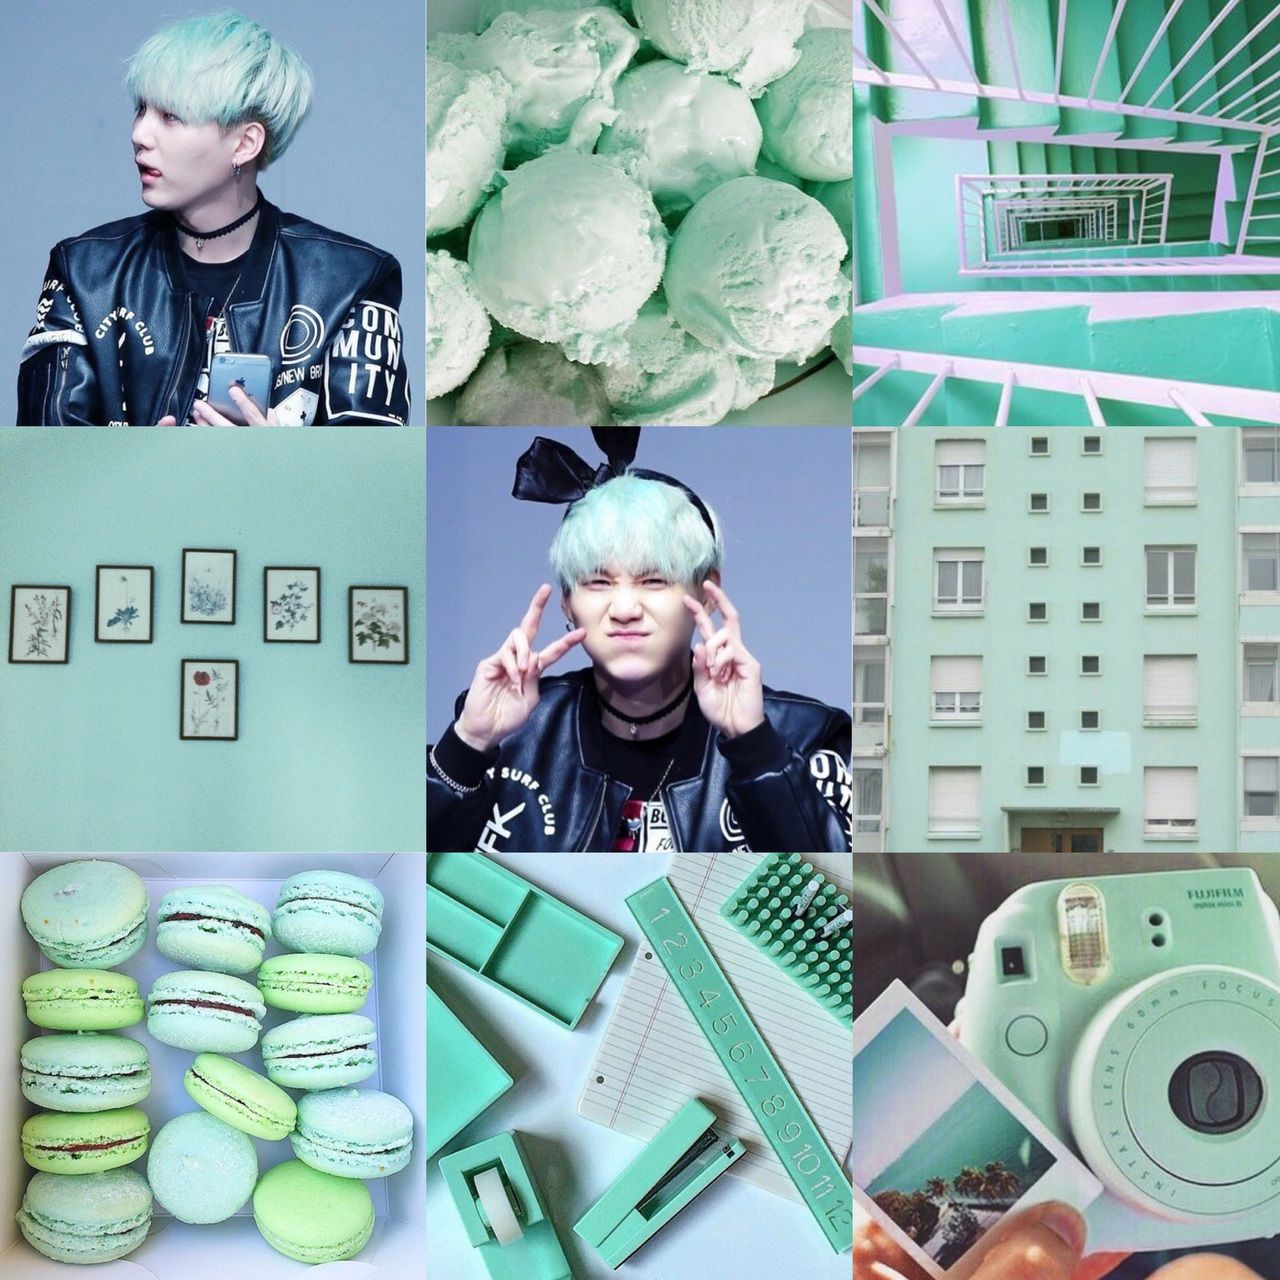 Image about kpop in mint green